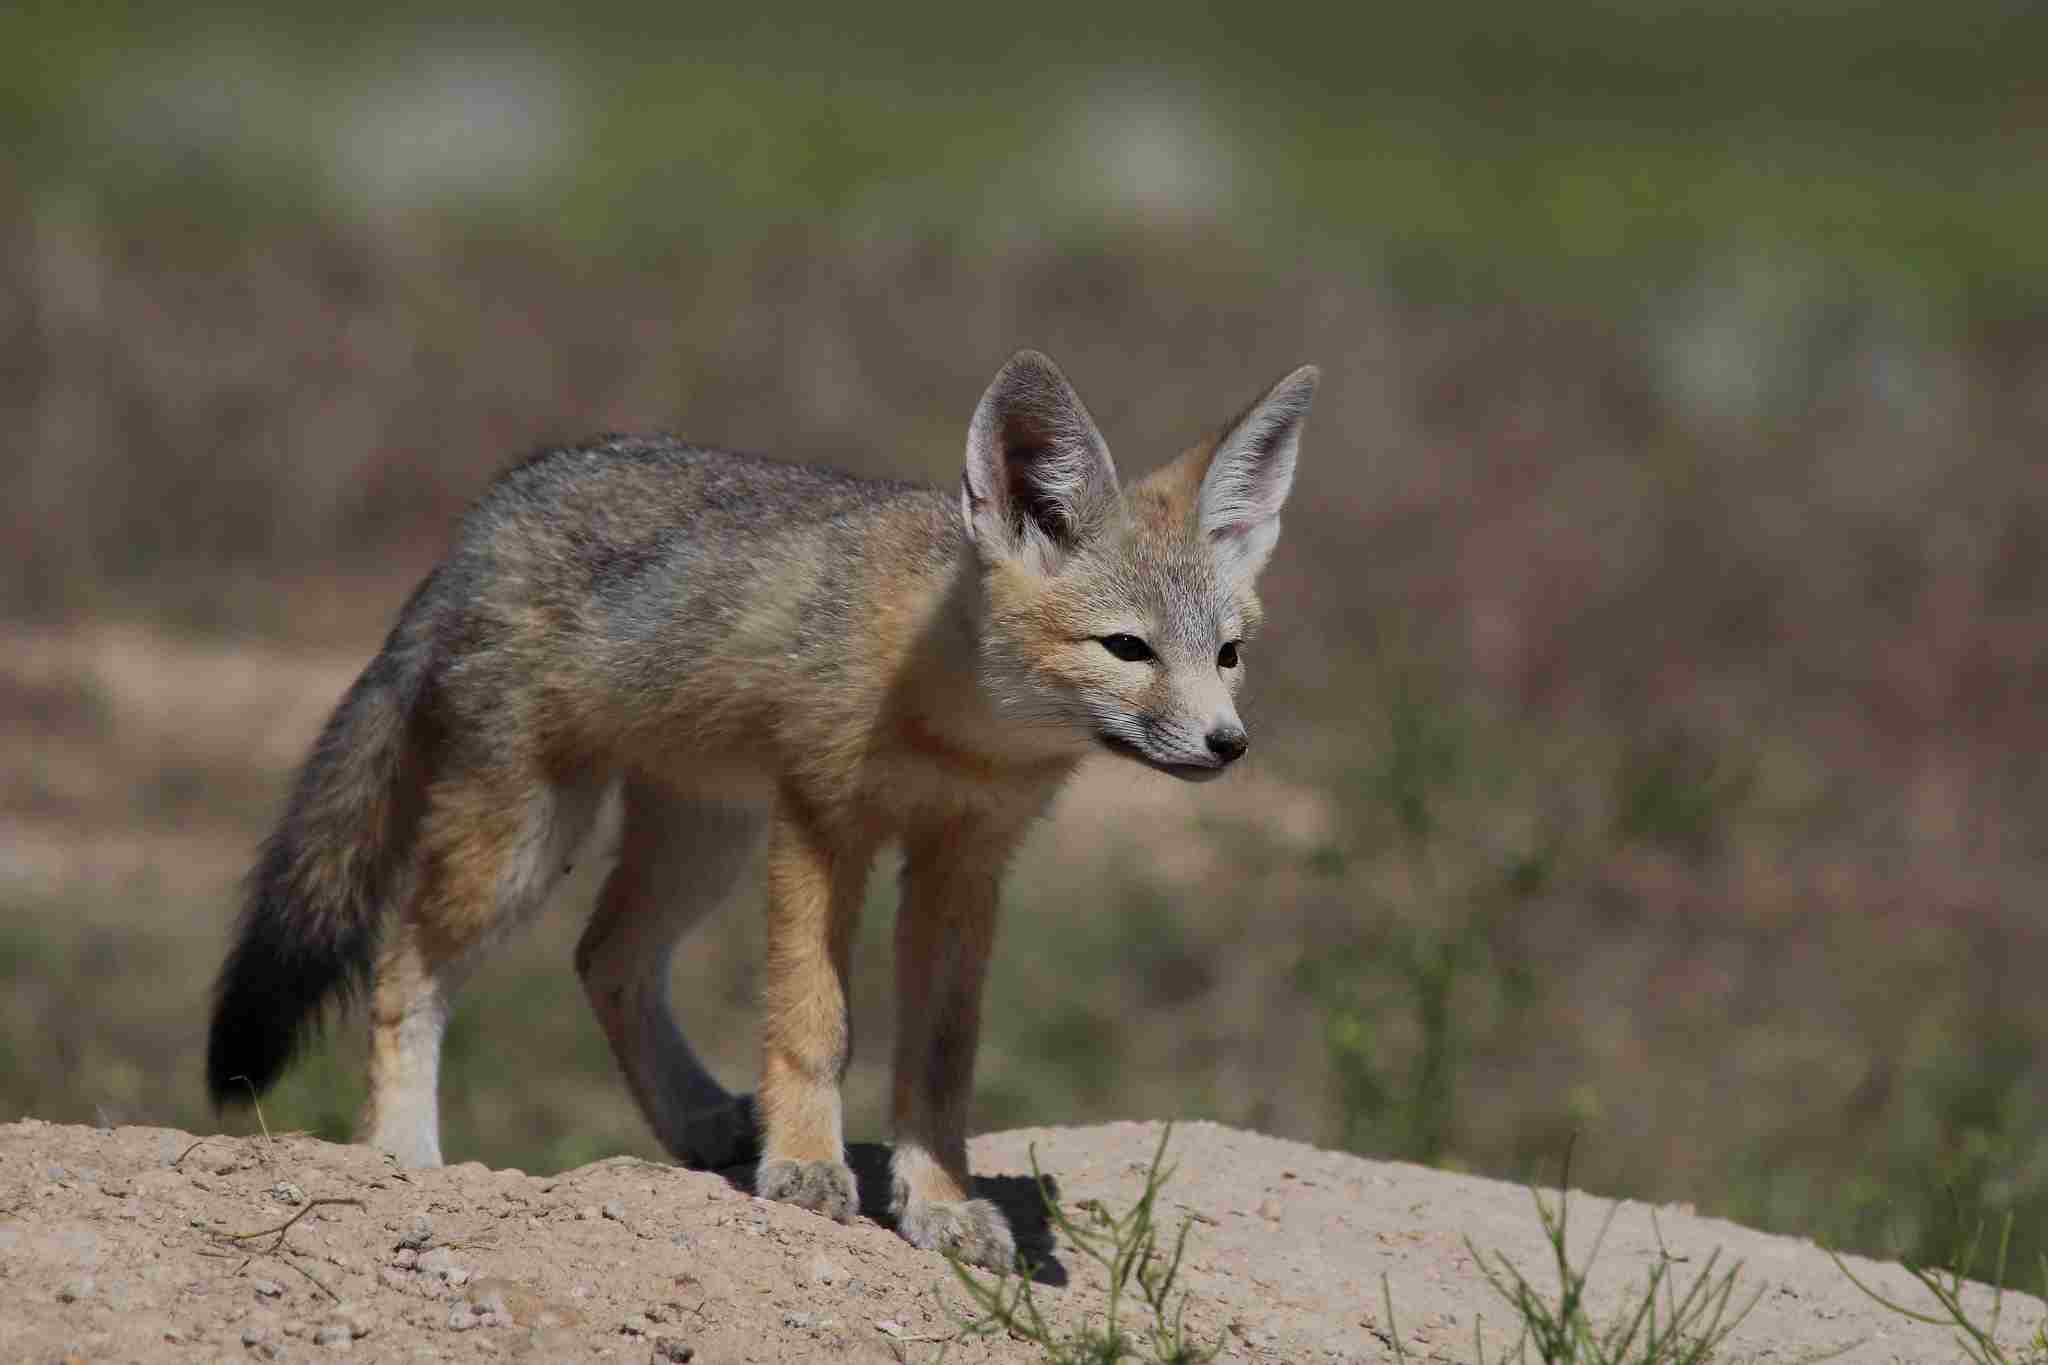 What Do Rabbits Eat in the Winter: Kit Foxes Prey On Rabbits in the Desert (Credit: Bureau of Land Management - Utah 2015, Uploaded Online 2016)